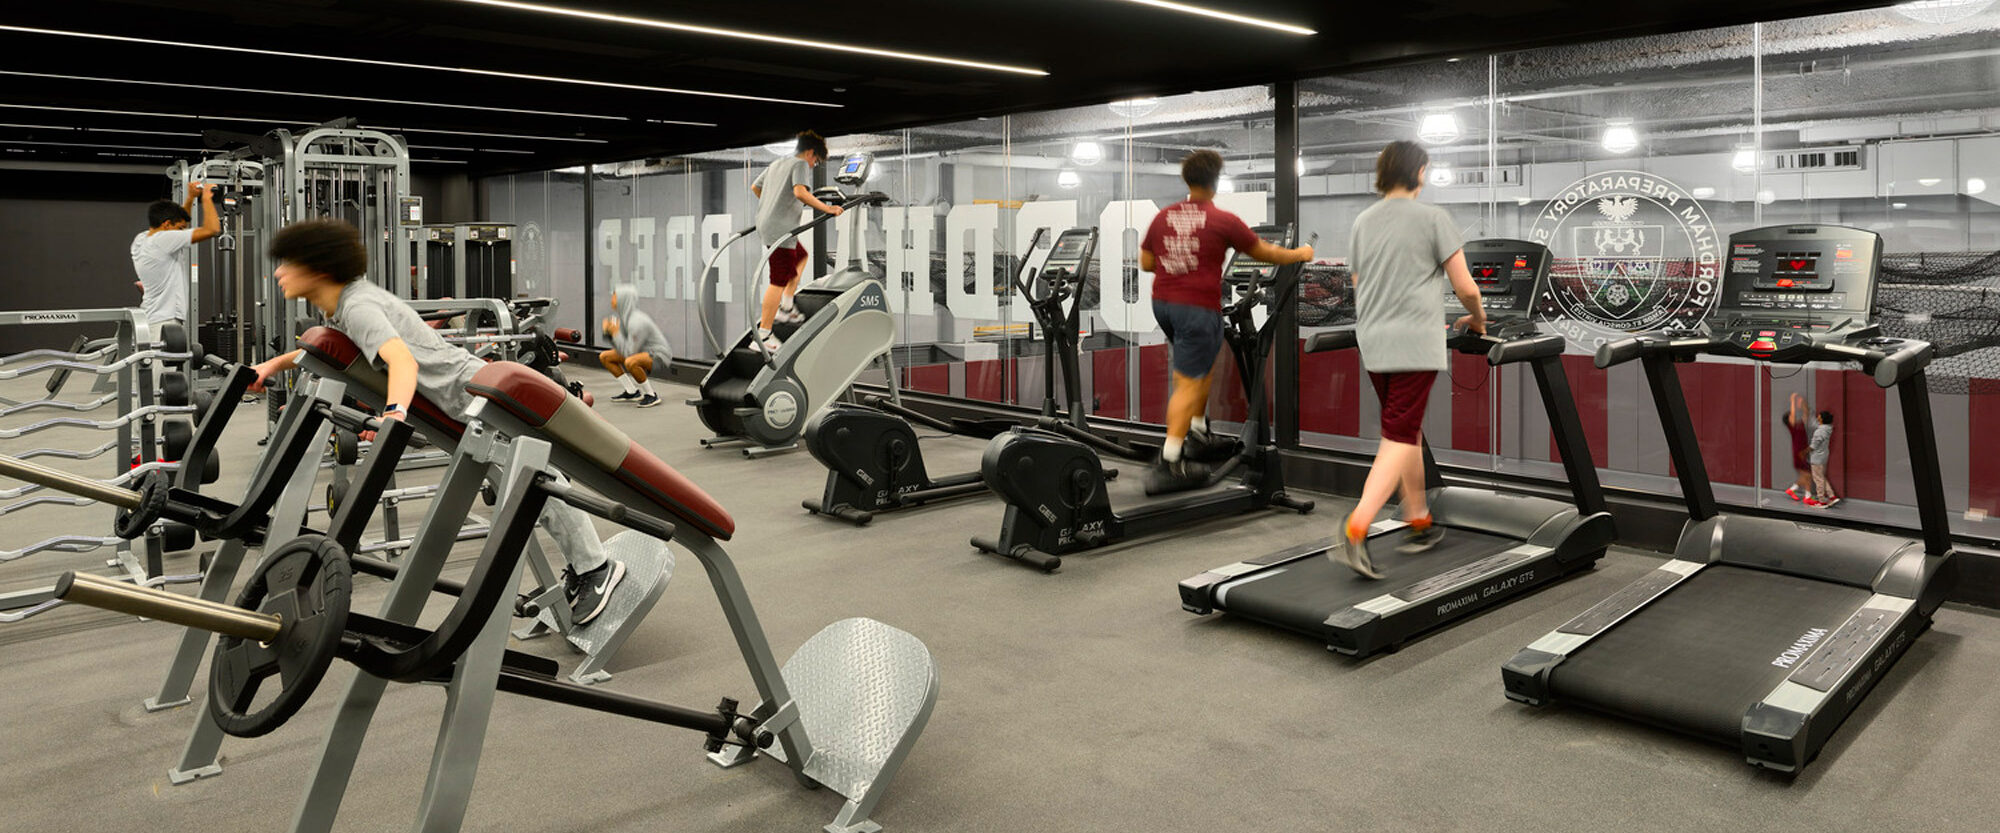 Modern gym interior featuring an array of fitness equipment, including treadmills, ellipticals, and weight machines, with mirrored walls enhancing the space's depth and motivational graphics adorning the walls for an energetic workout environment.